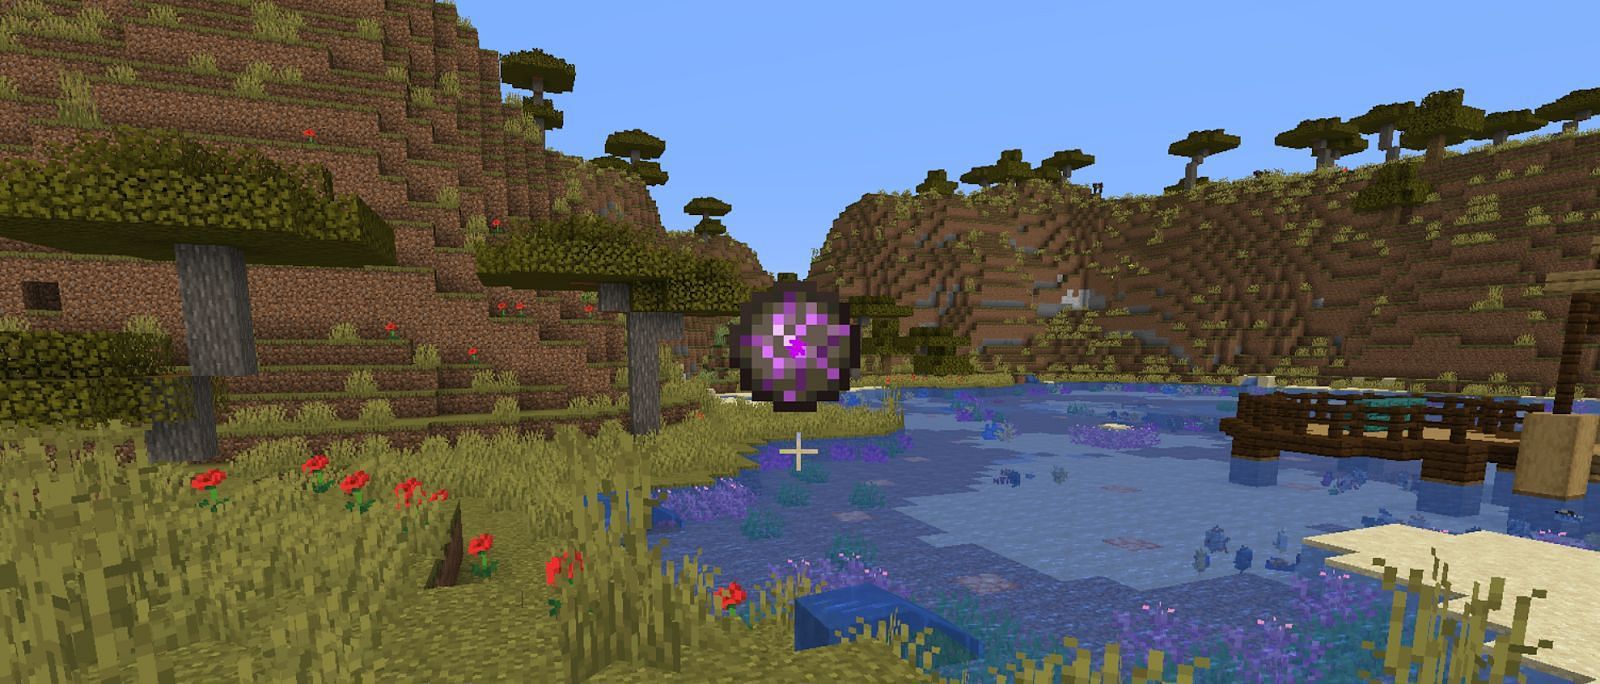 Can Dragon Fireball be used as a decorative item in Minecraft?